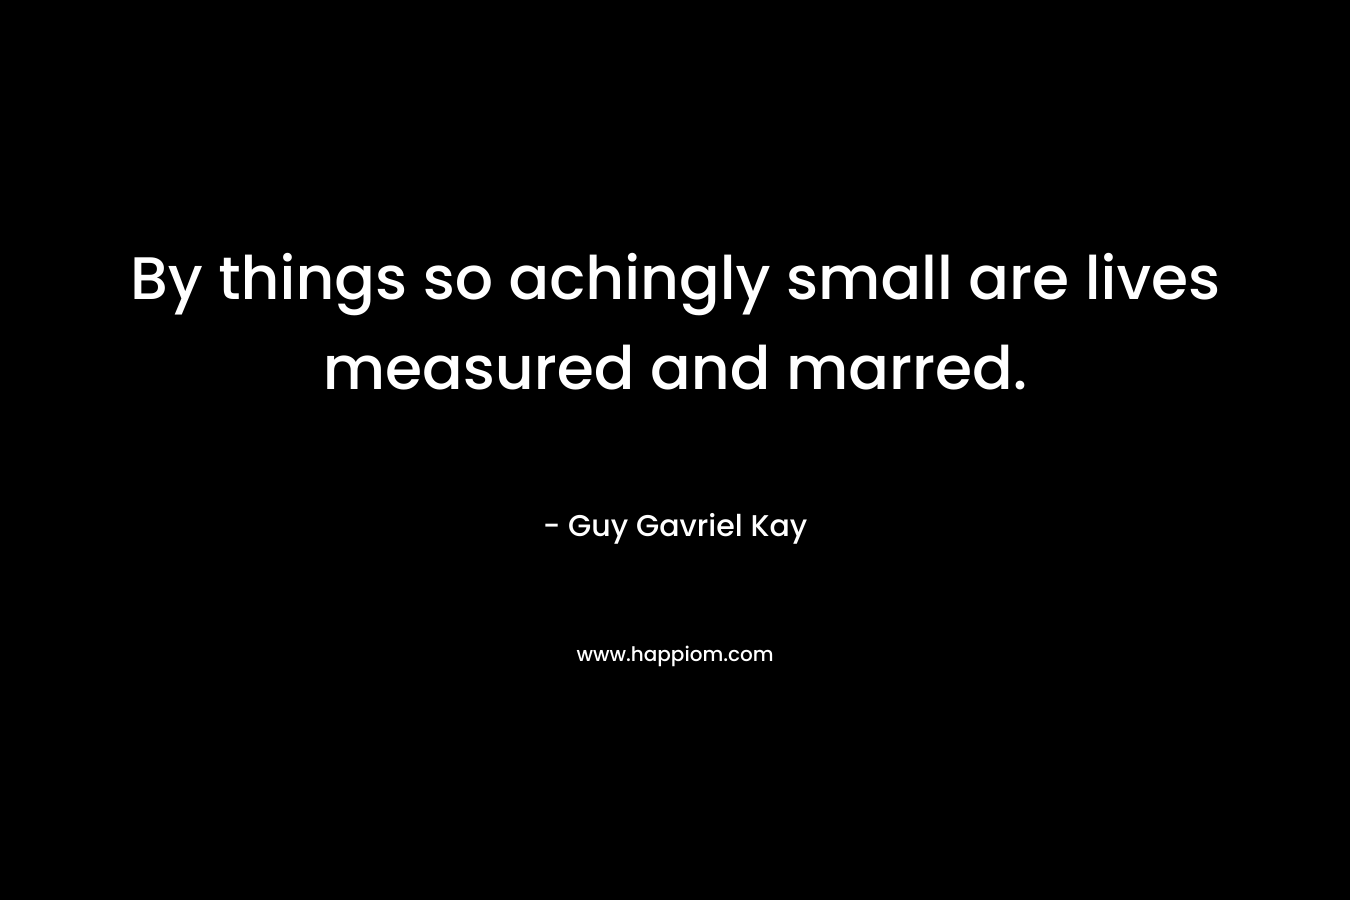 By things so achingly small are lives measured and marred.